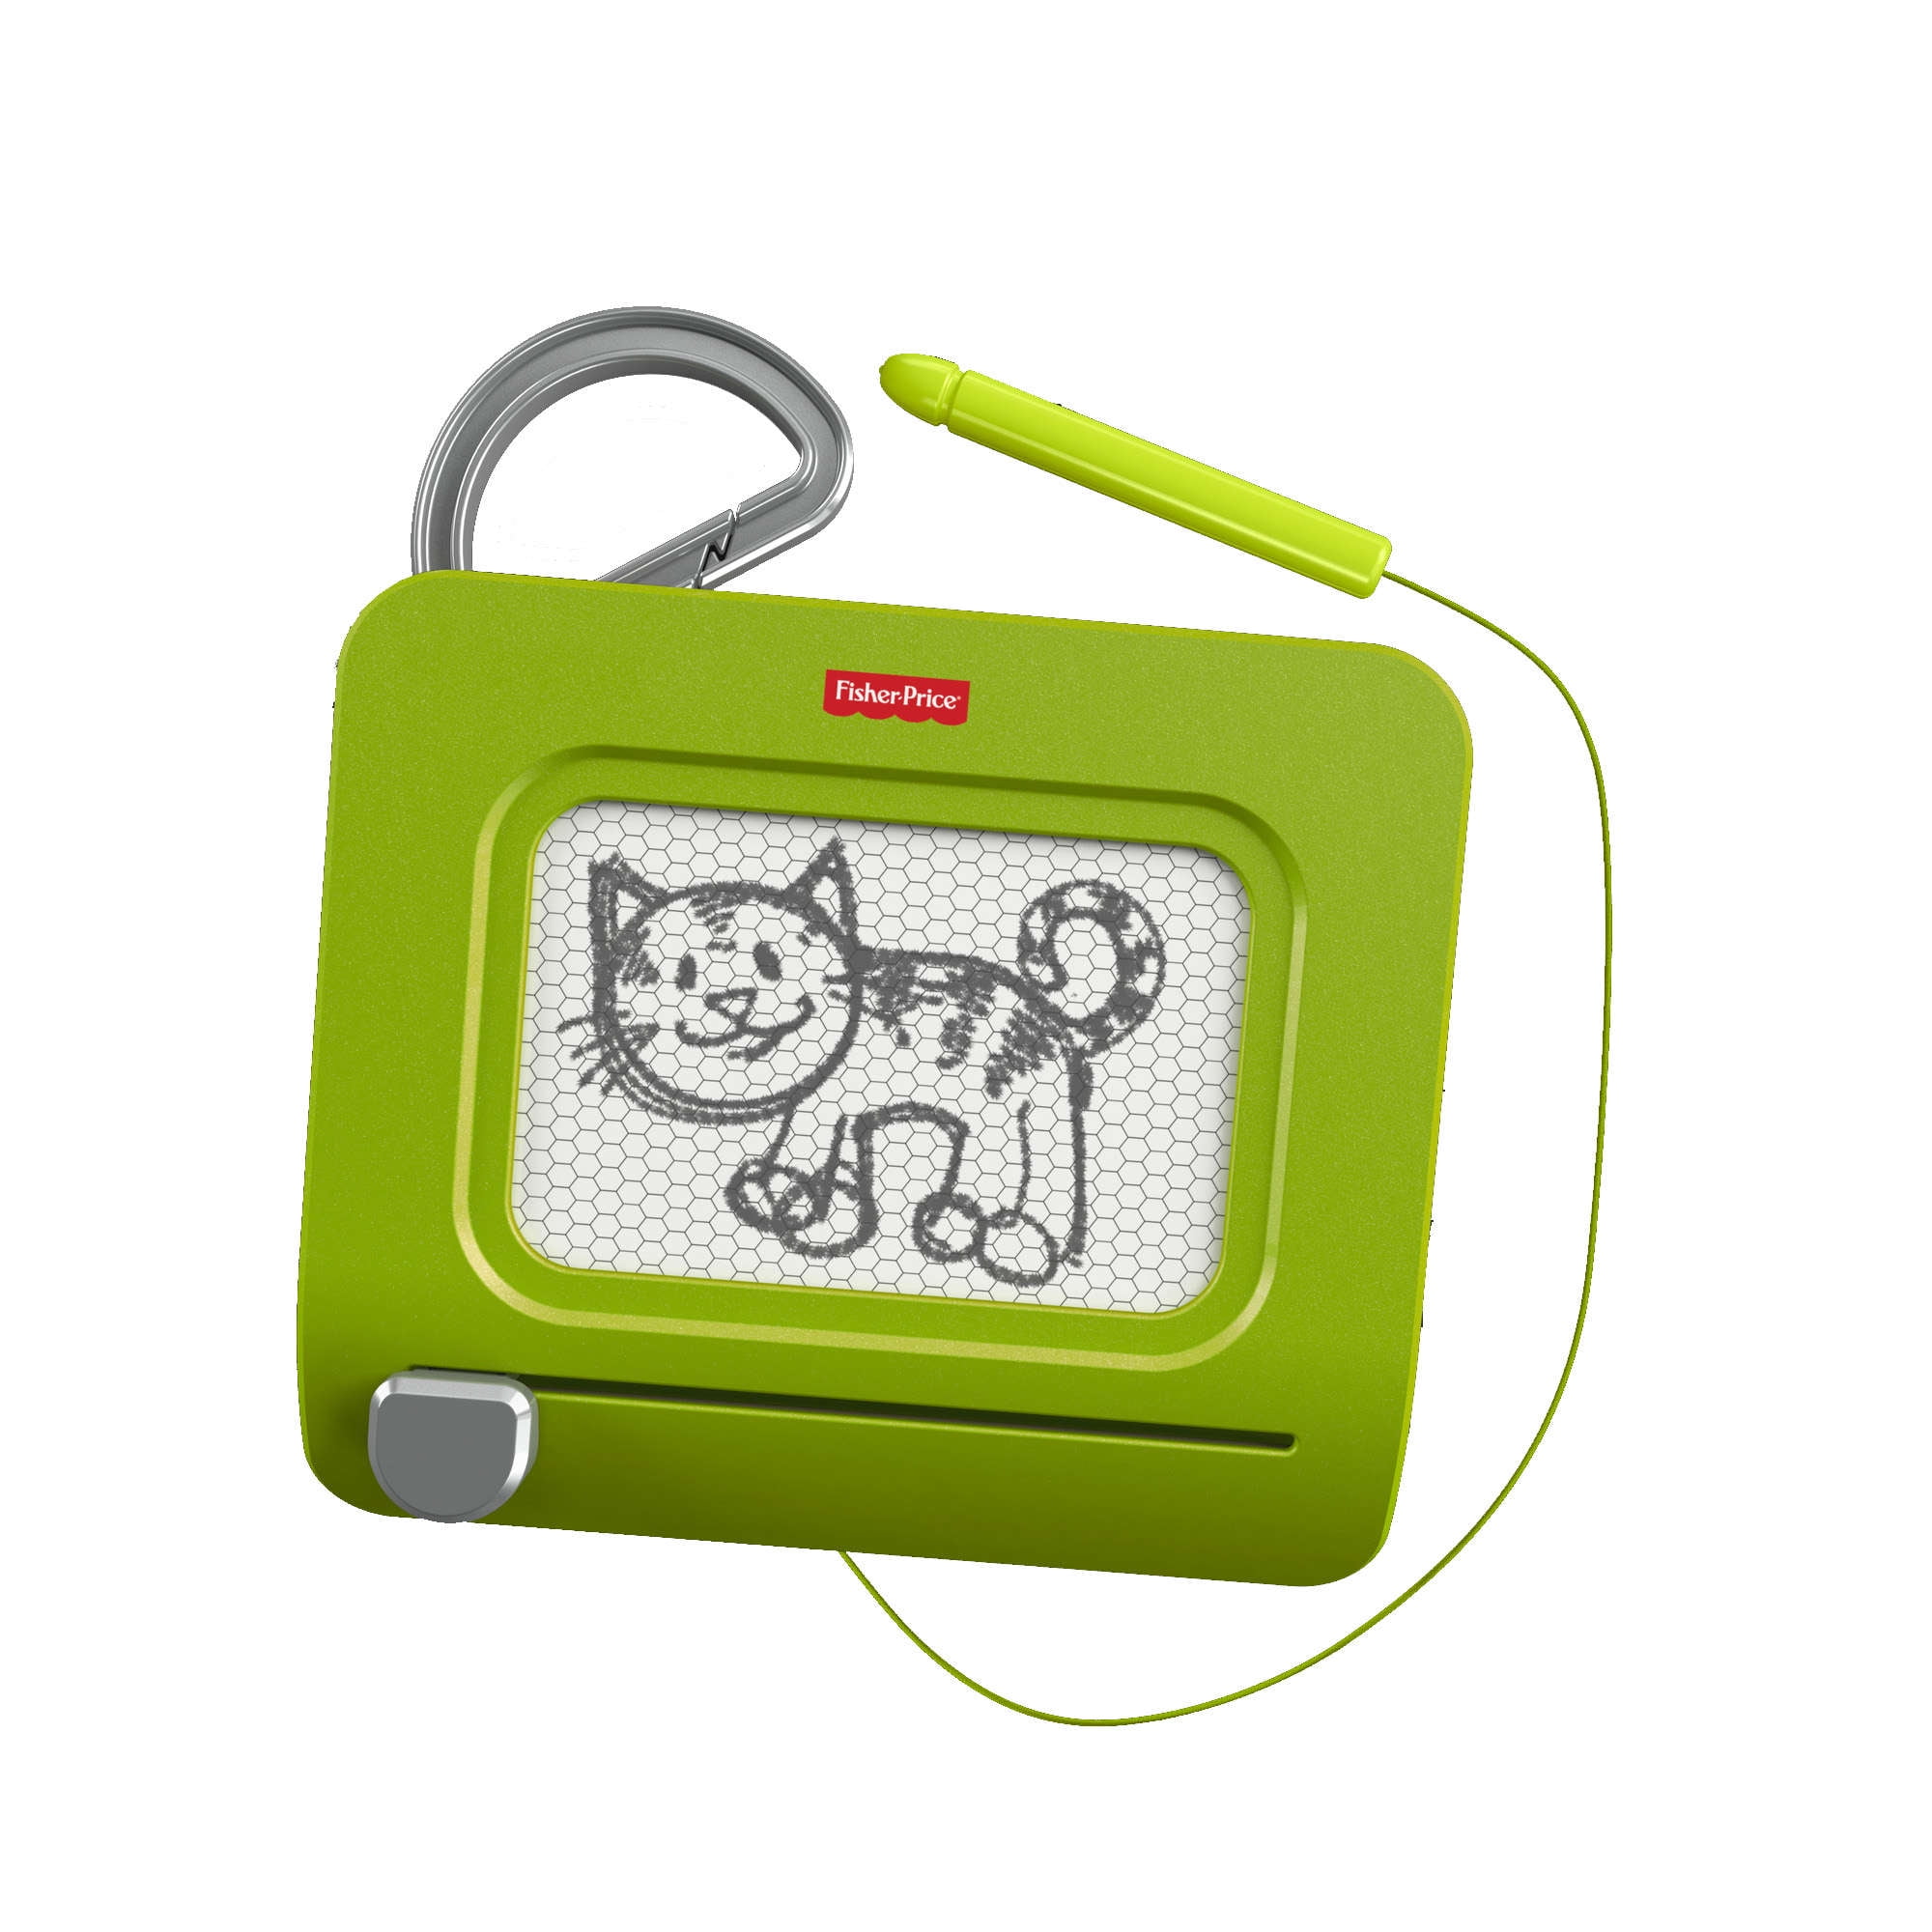 Details about   NEW Fisher Price Doodle Pro Clip Travel Doodle Pro Green